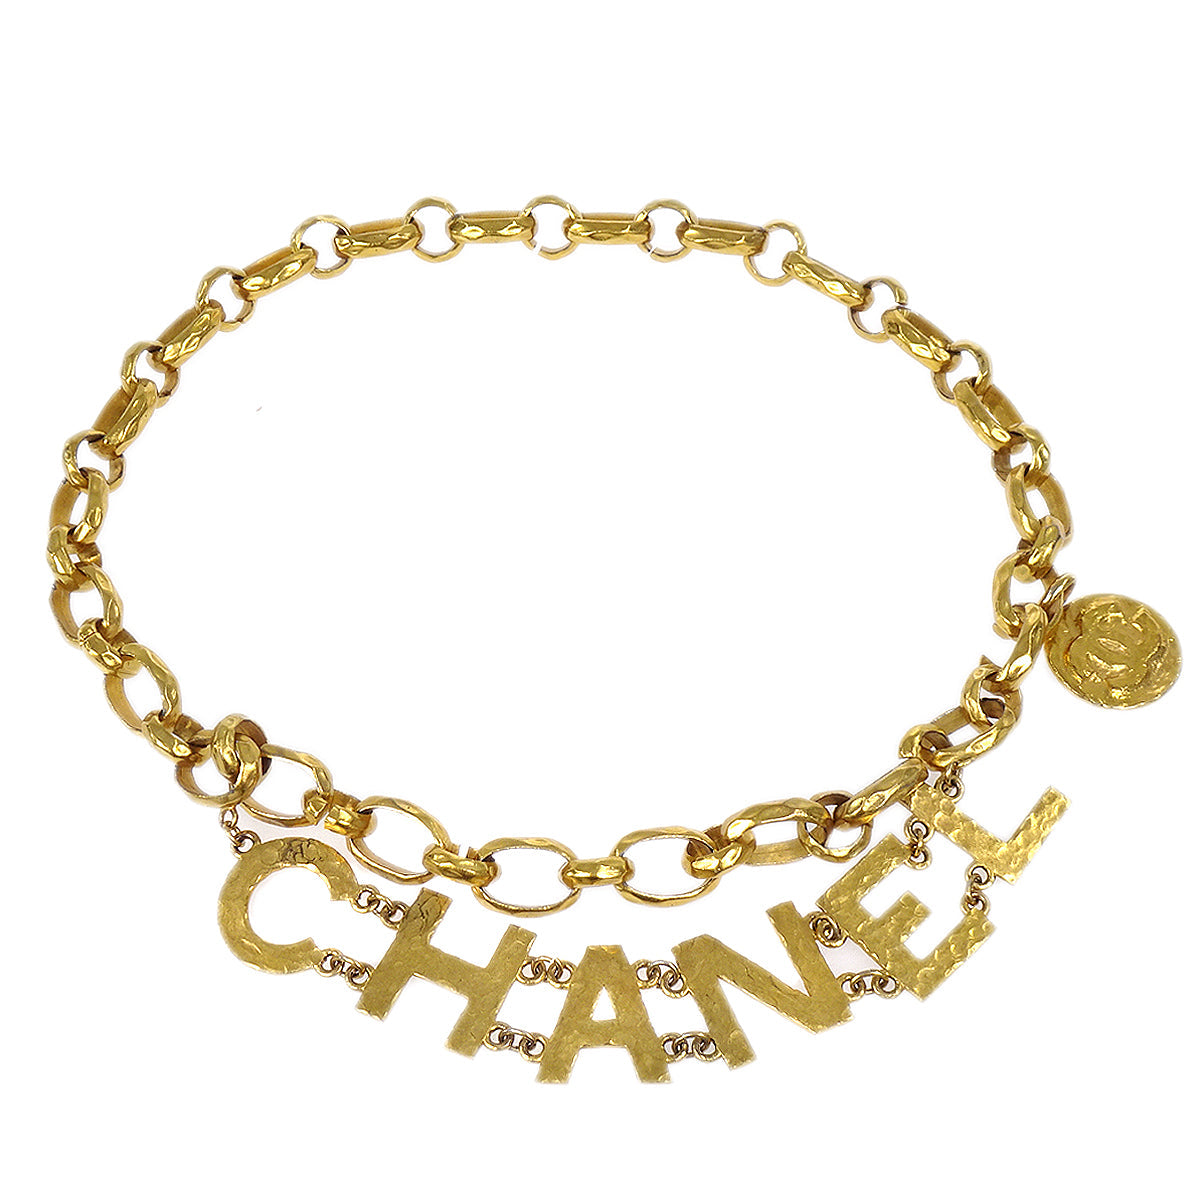 Chanel Medallion Gold Chain Belt 93A Small Good 88062